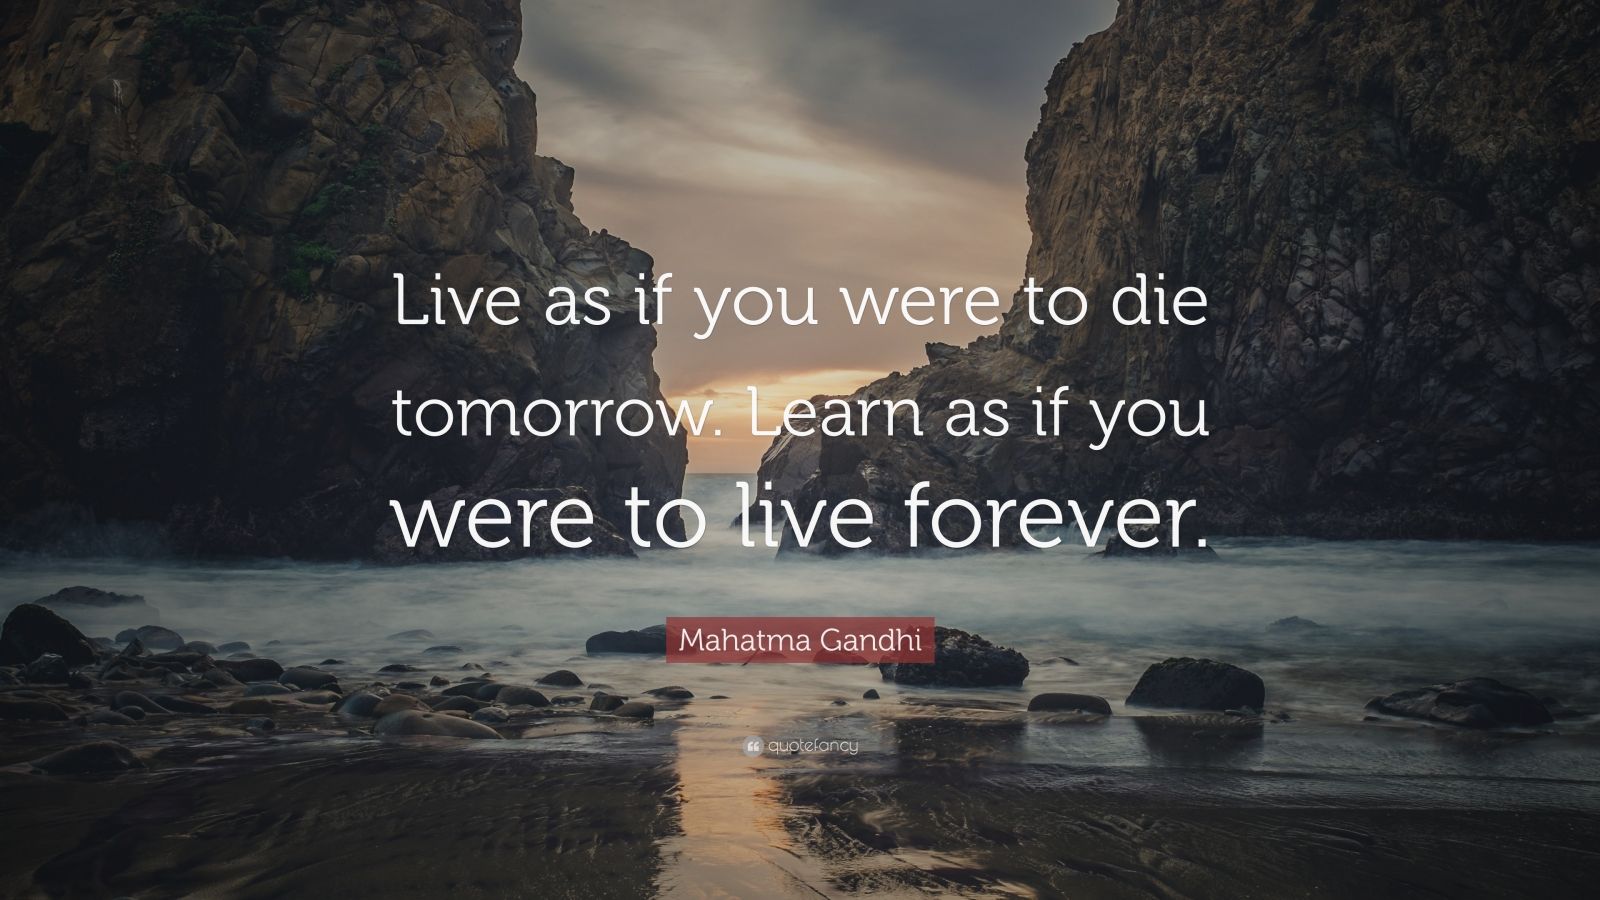 Mahatma Gandhi Quote: “Live as if you were to die tomorrow. Learn as if